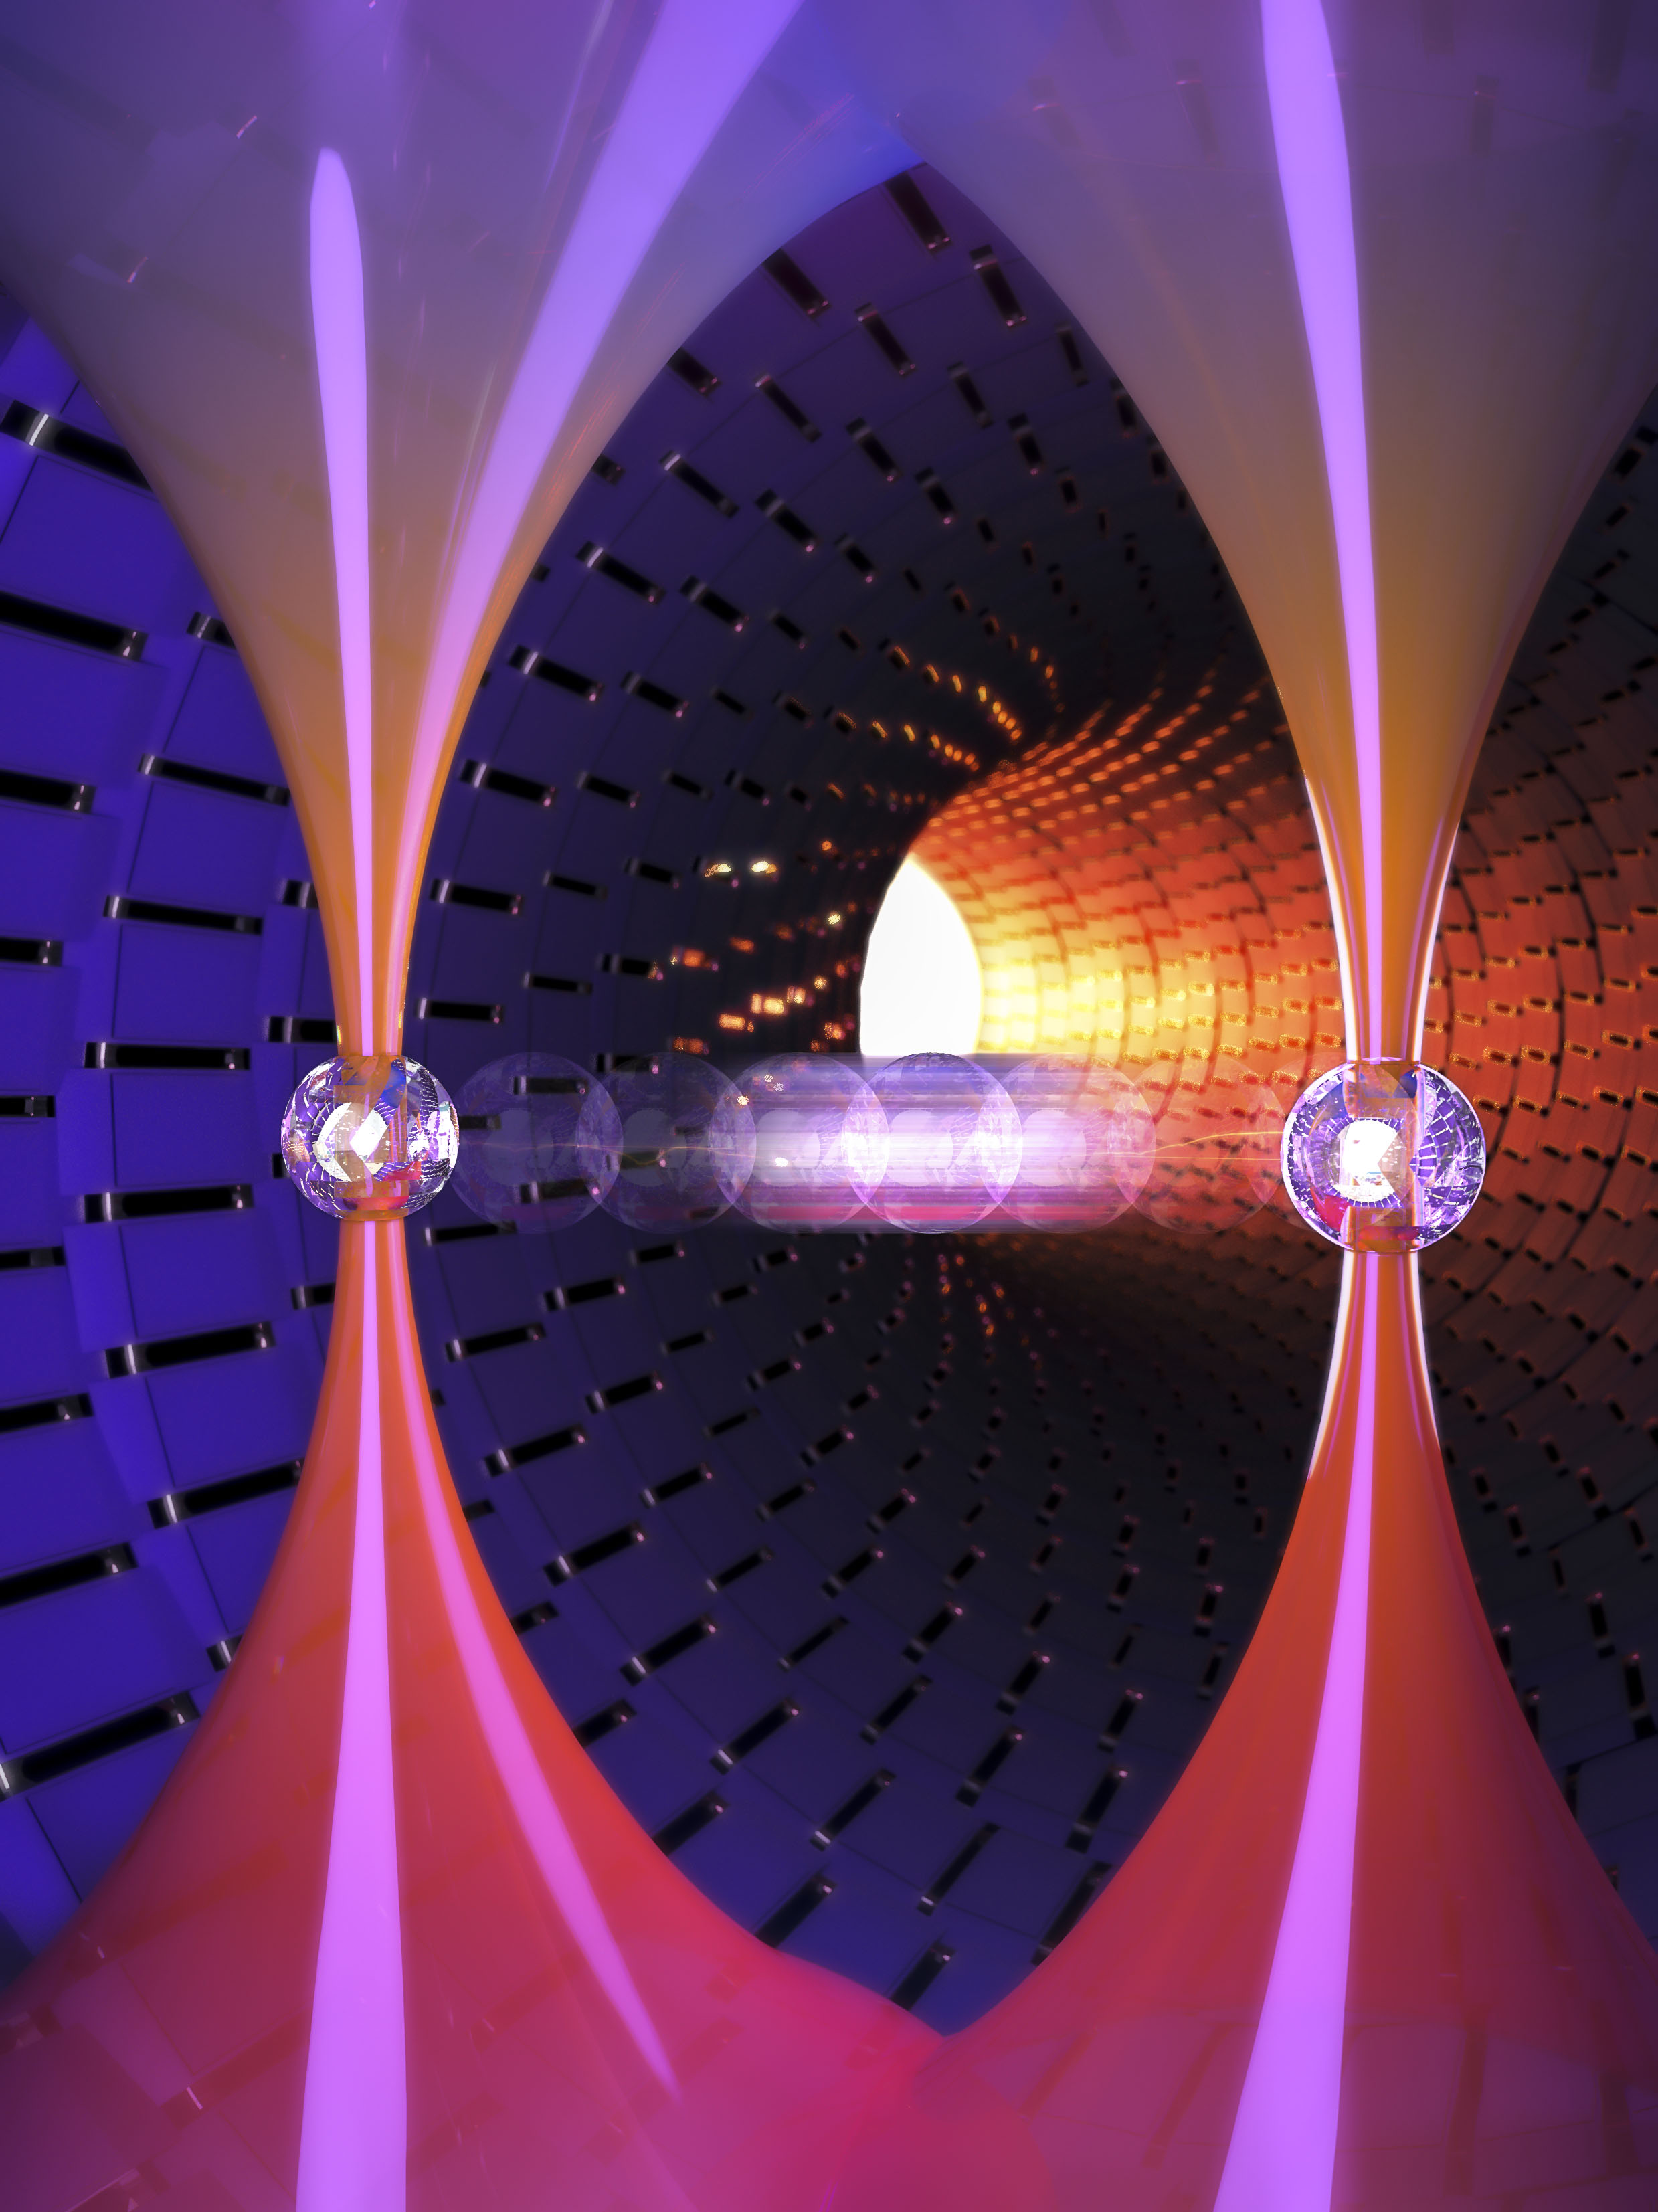 Scientists used two optical traps to throw and catch individual atoms